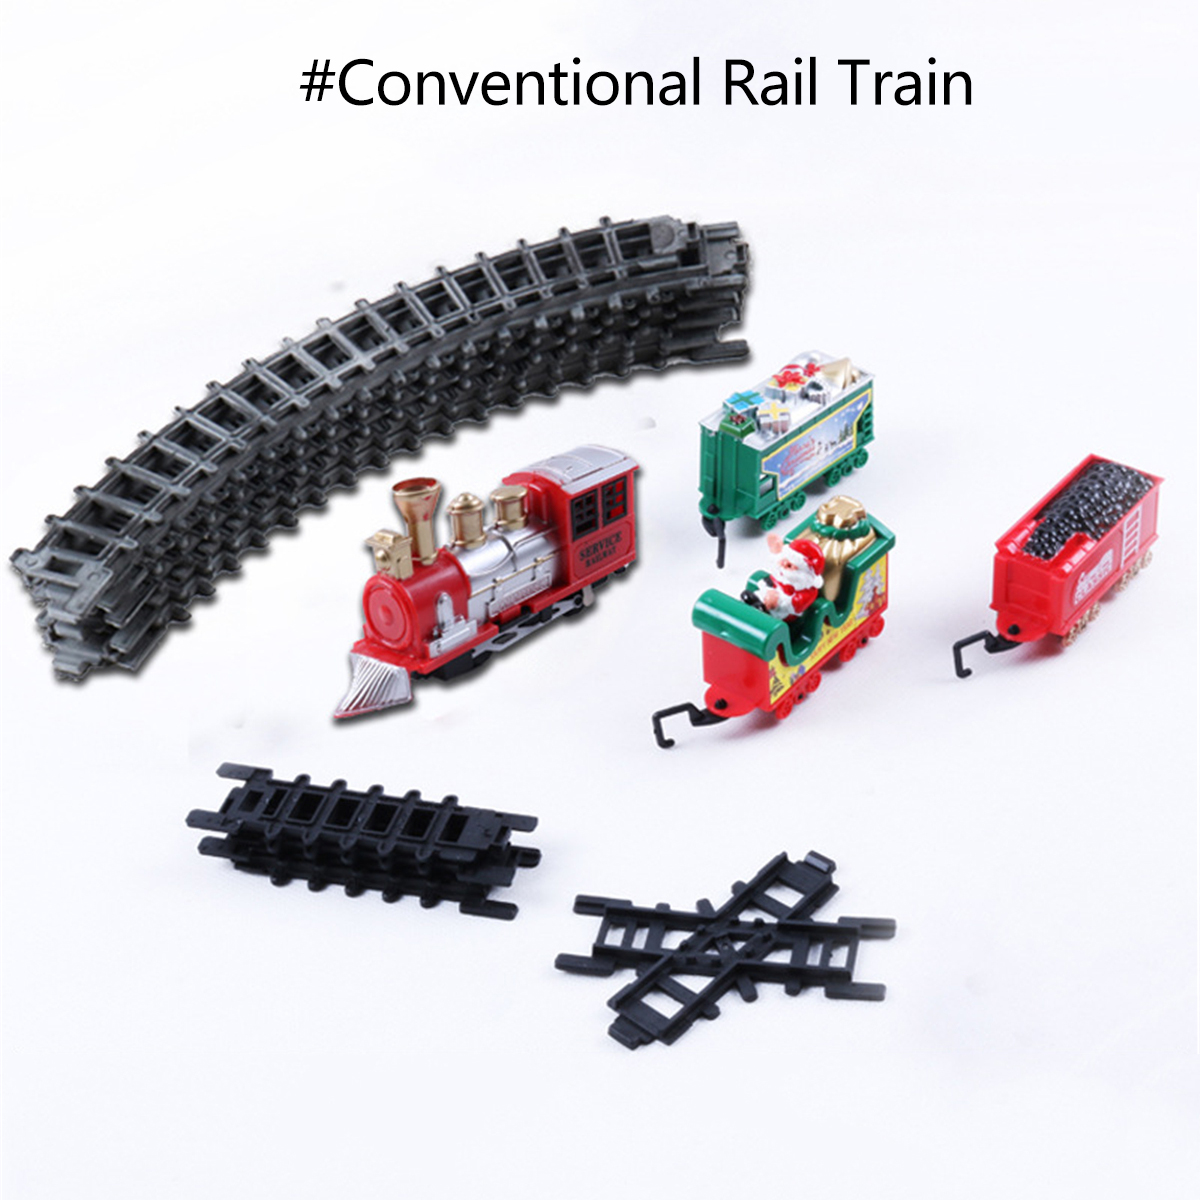 Mini-Electric-ABS-DIY-Assembly-Realistic-Front-Rail-Train-Track-Play-Fun-Model-Toy-for-Kids-Christma-1766568-7